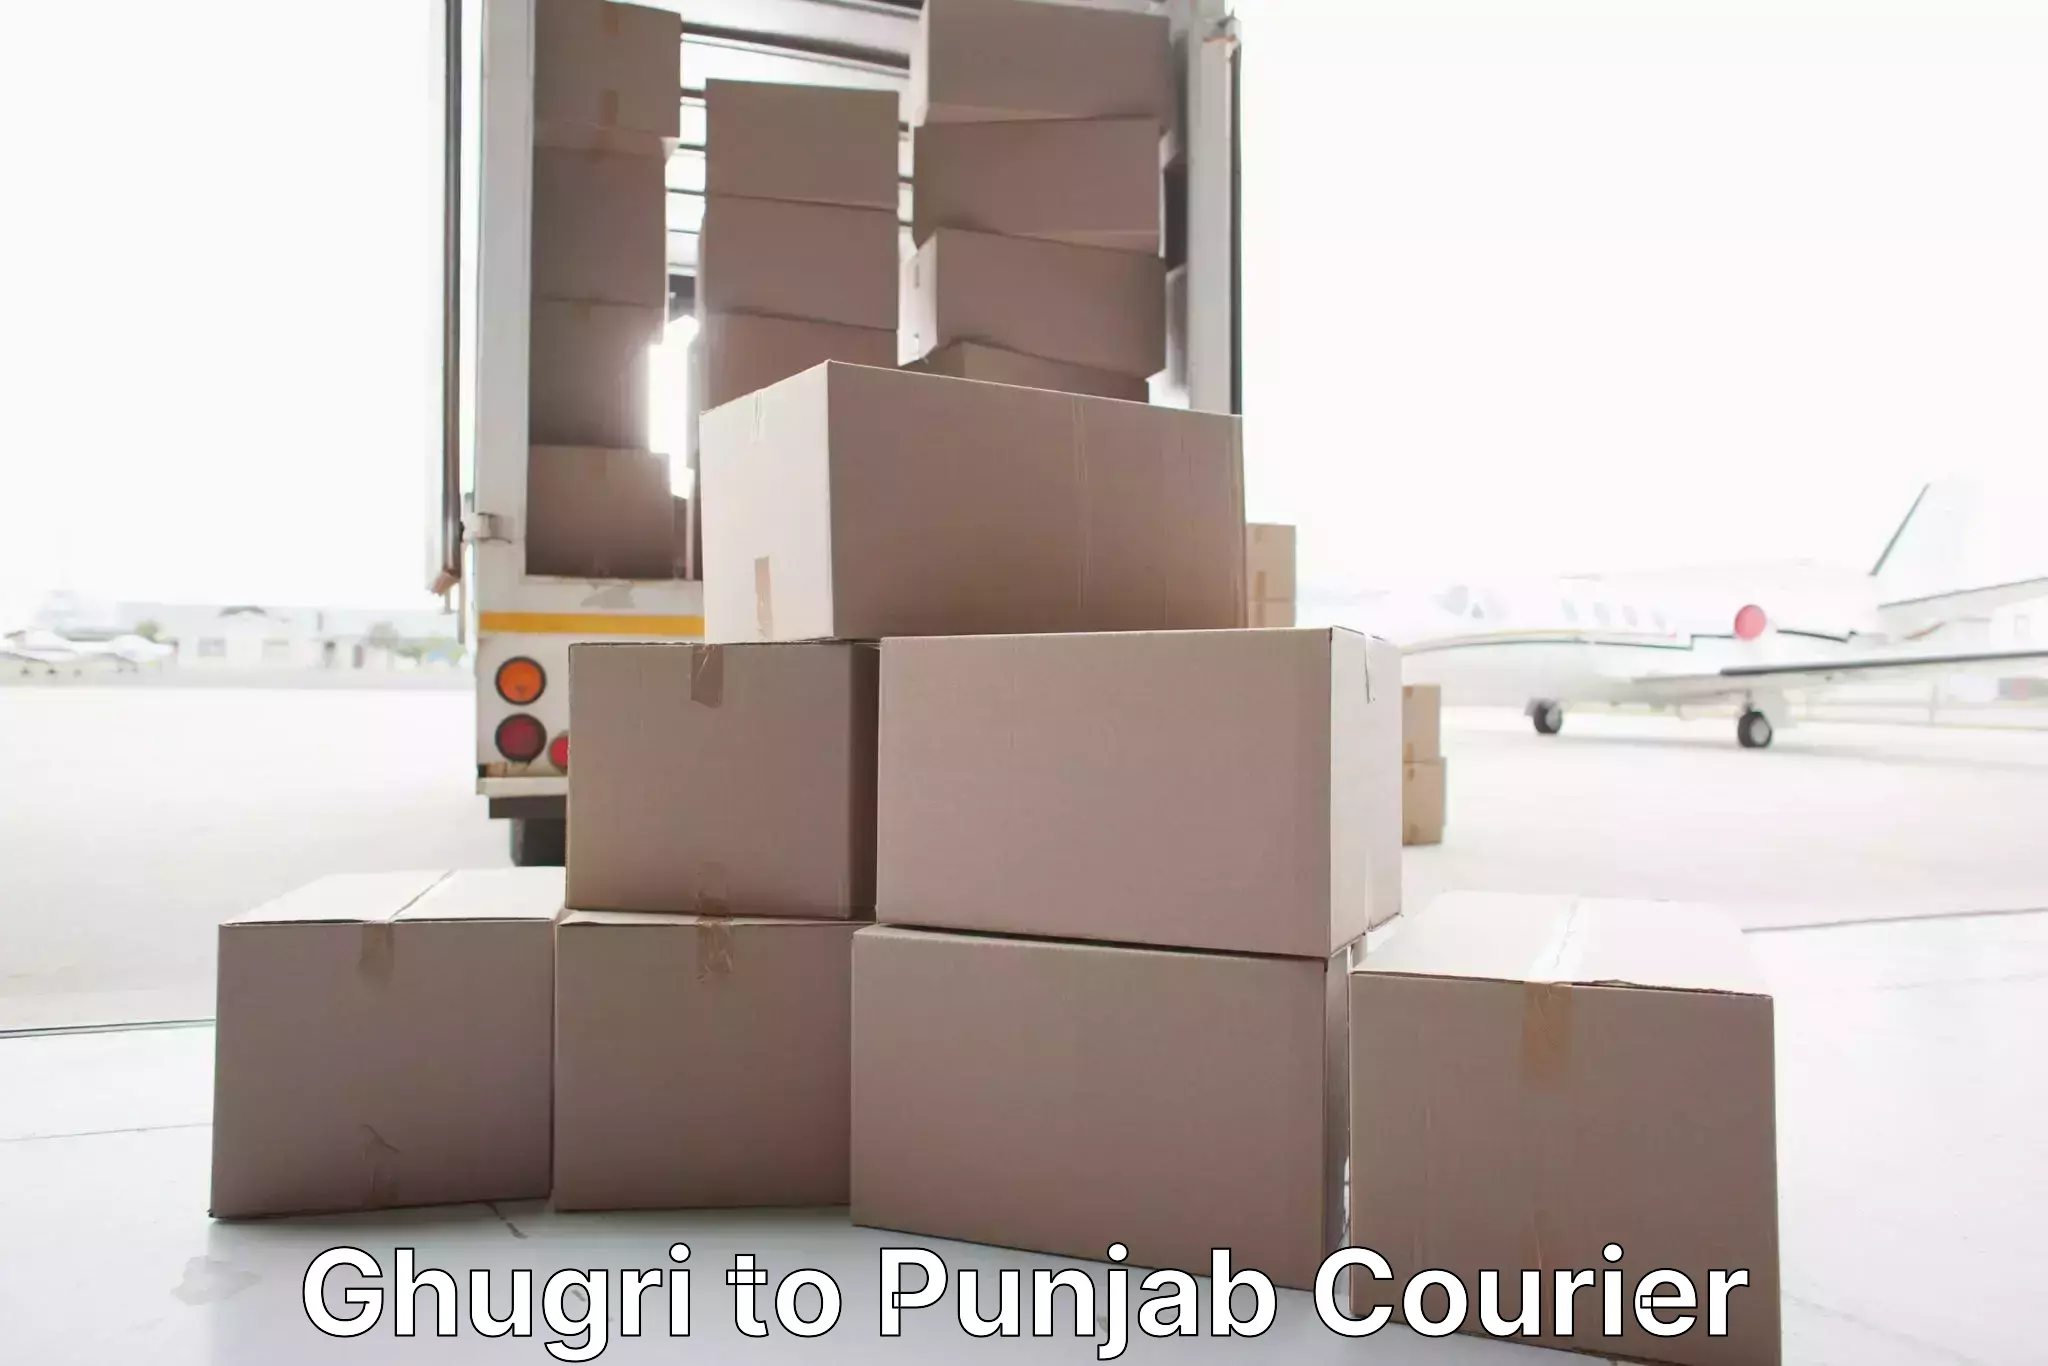 Professional movers and packers Ghugri to Ludhiana